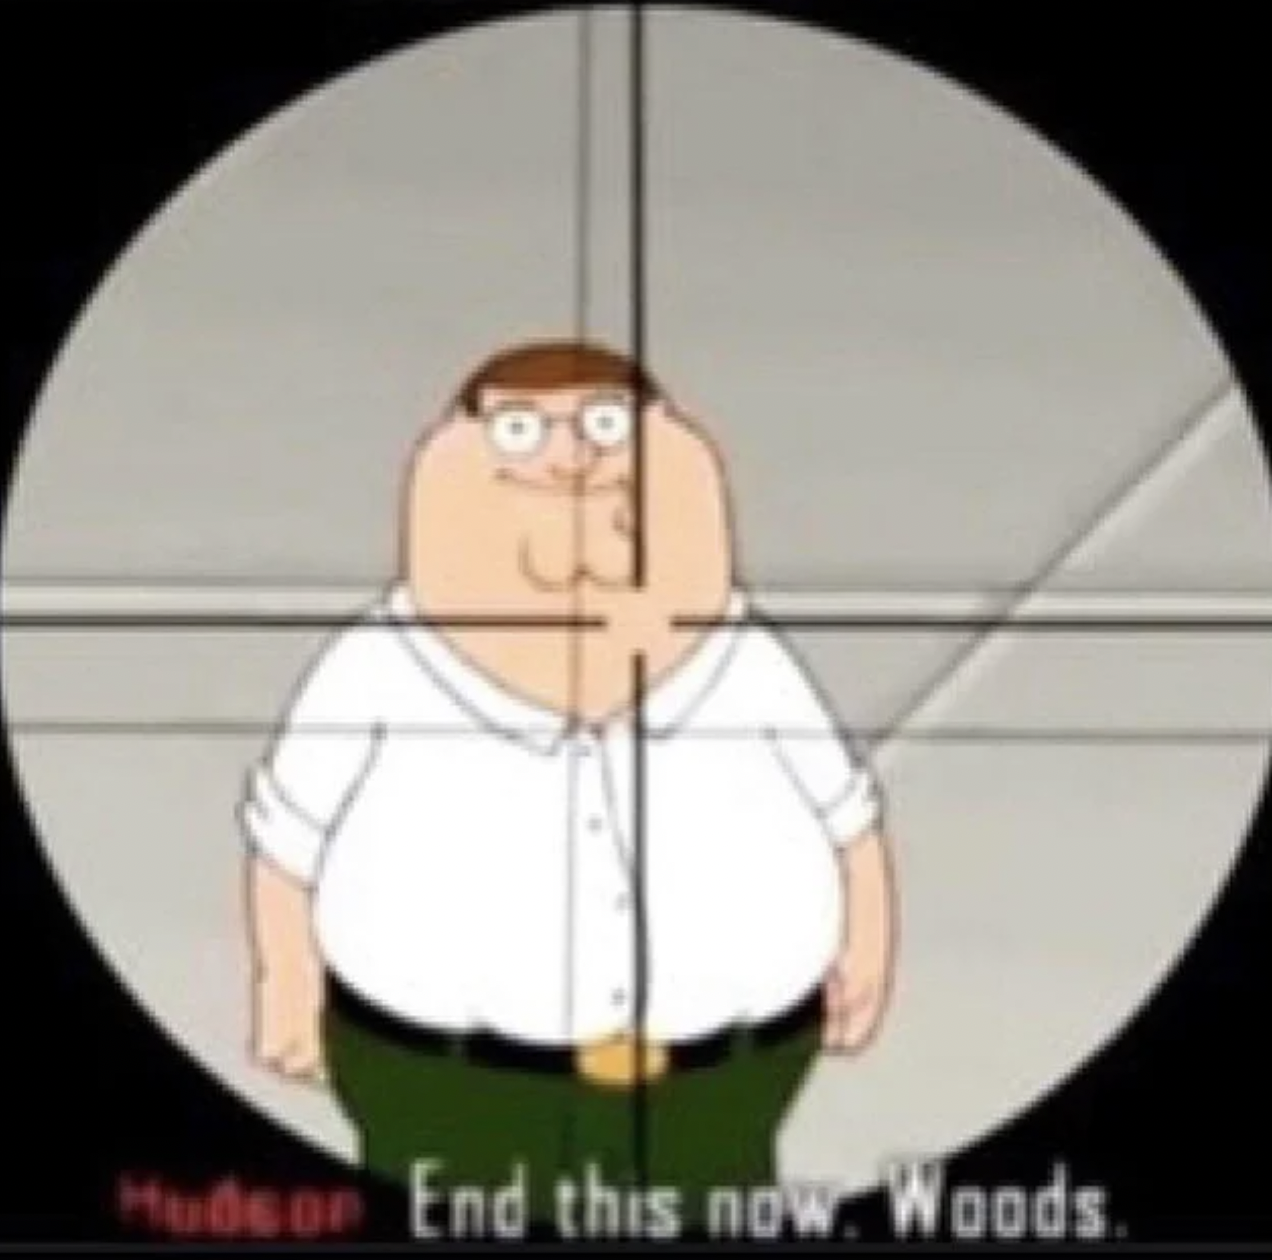 gaming memes - end this now woods meme - Hudson End this now. Woods.